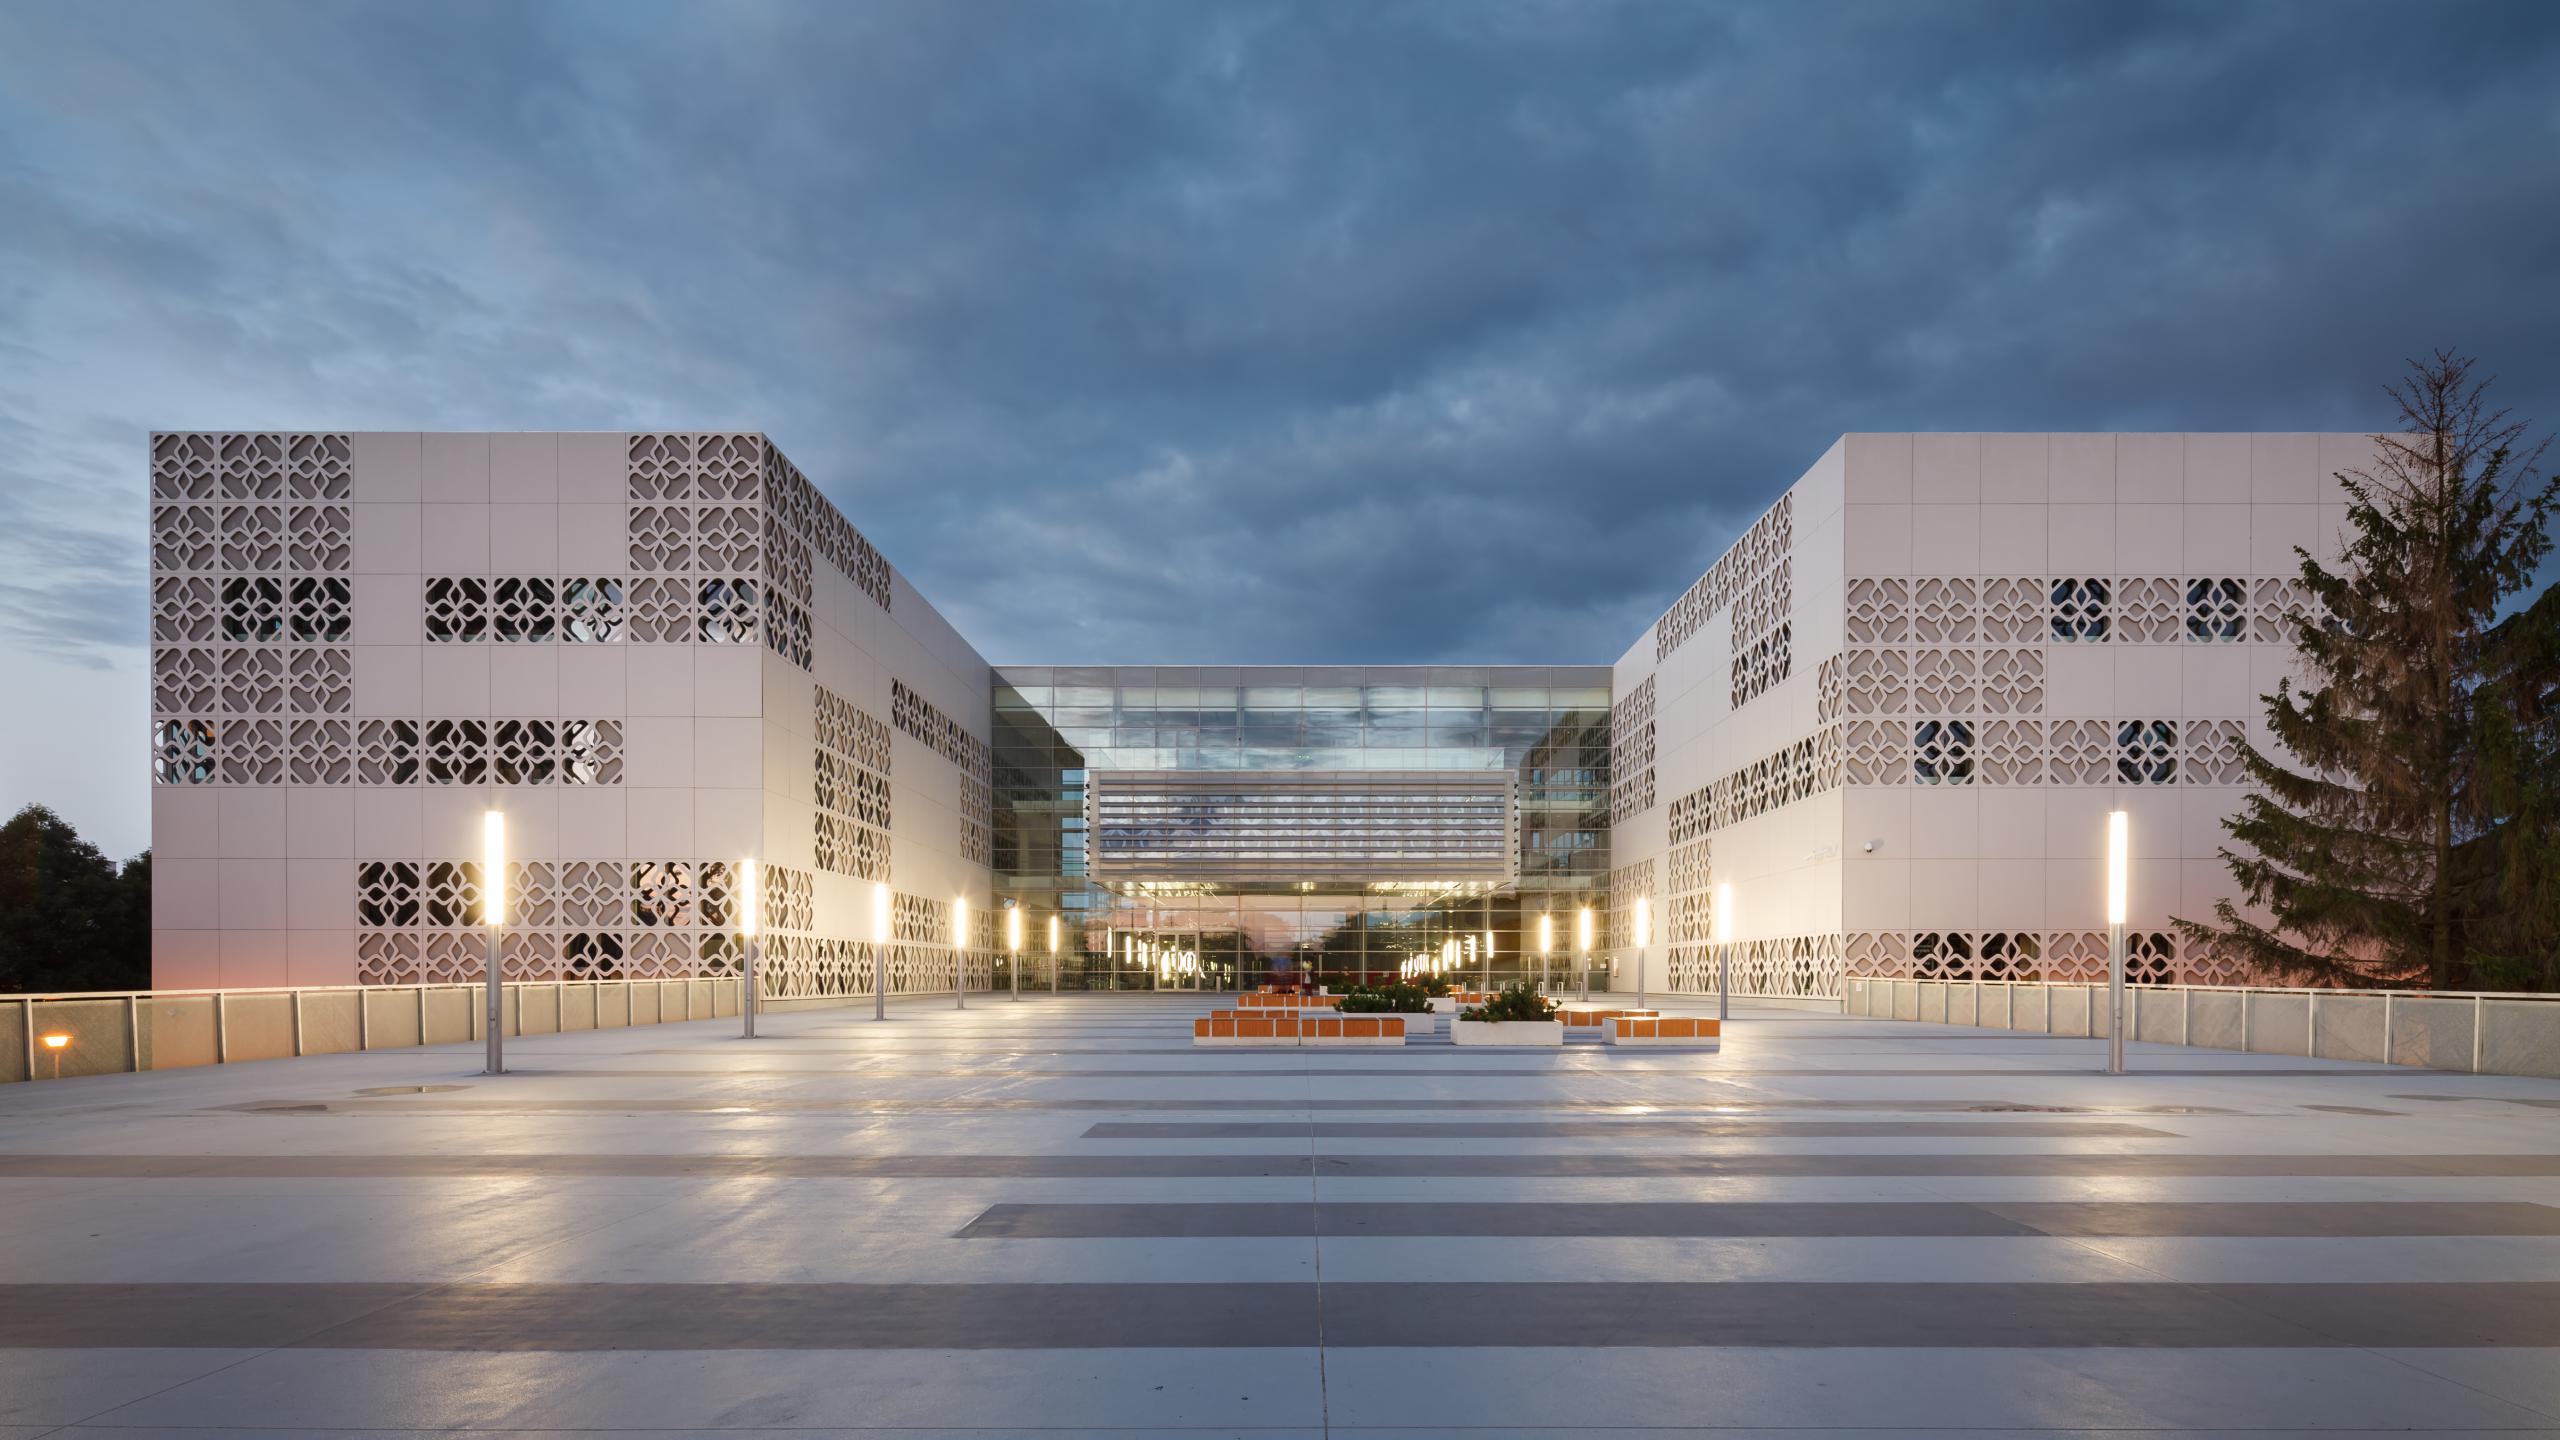 Photograph of Center of Modern Education, designed by AA_Studio/Group-Arch and located in Białystok, Poland